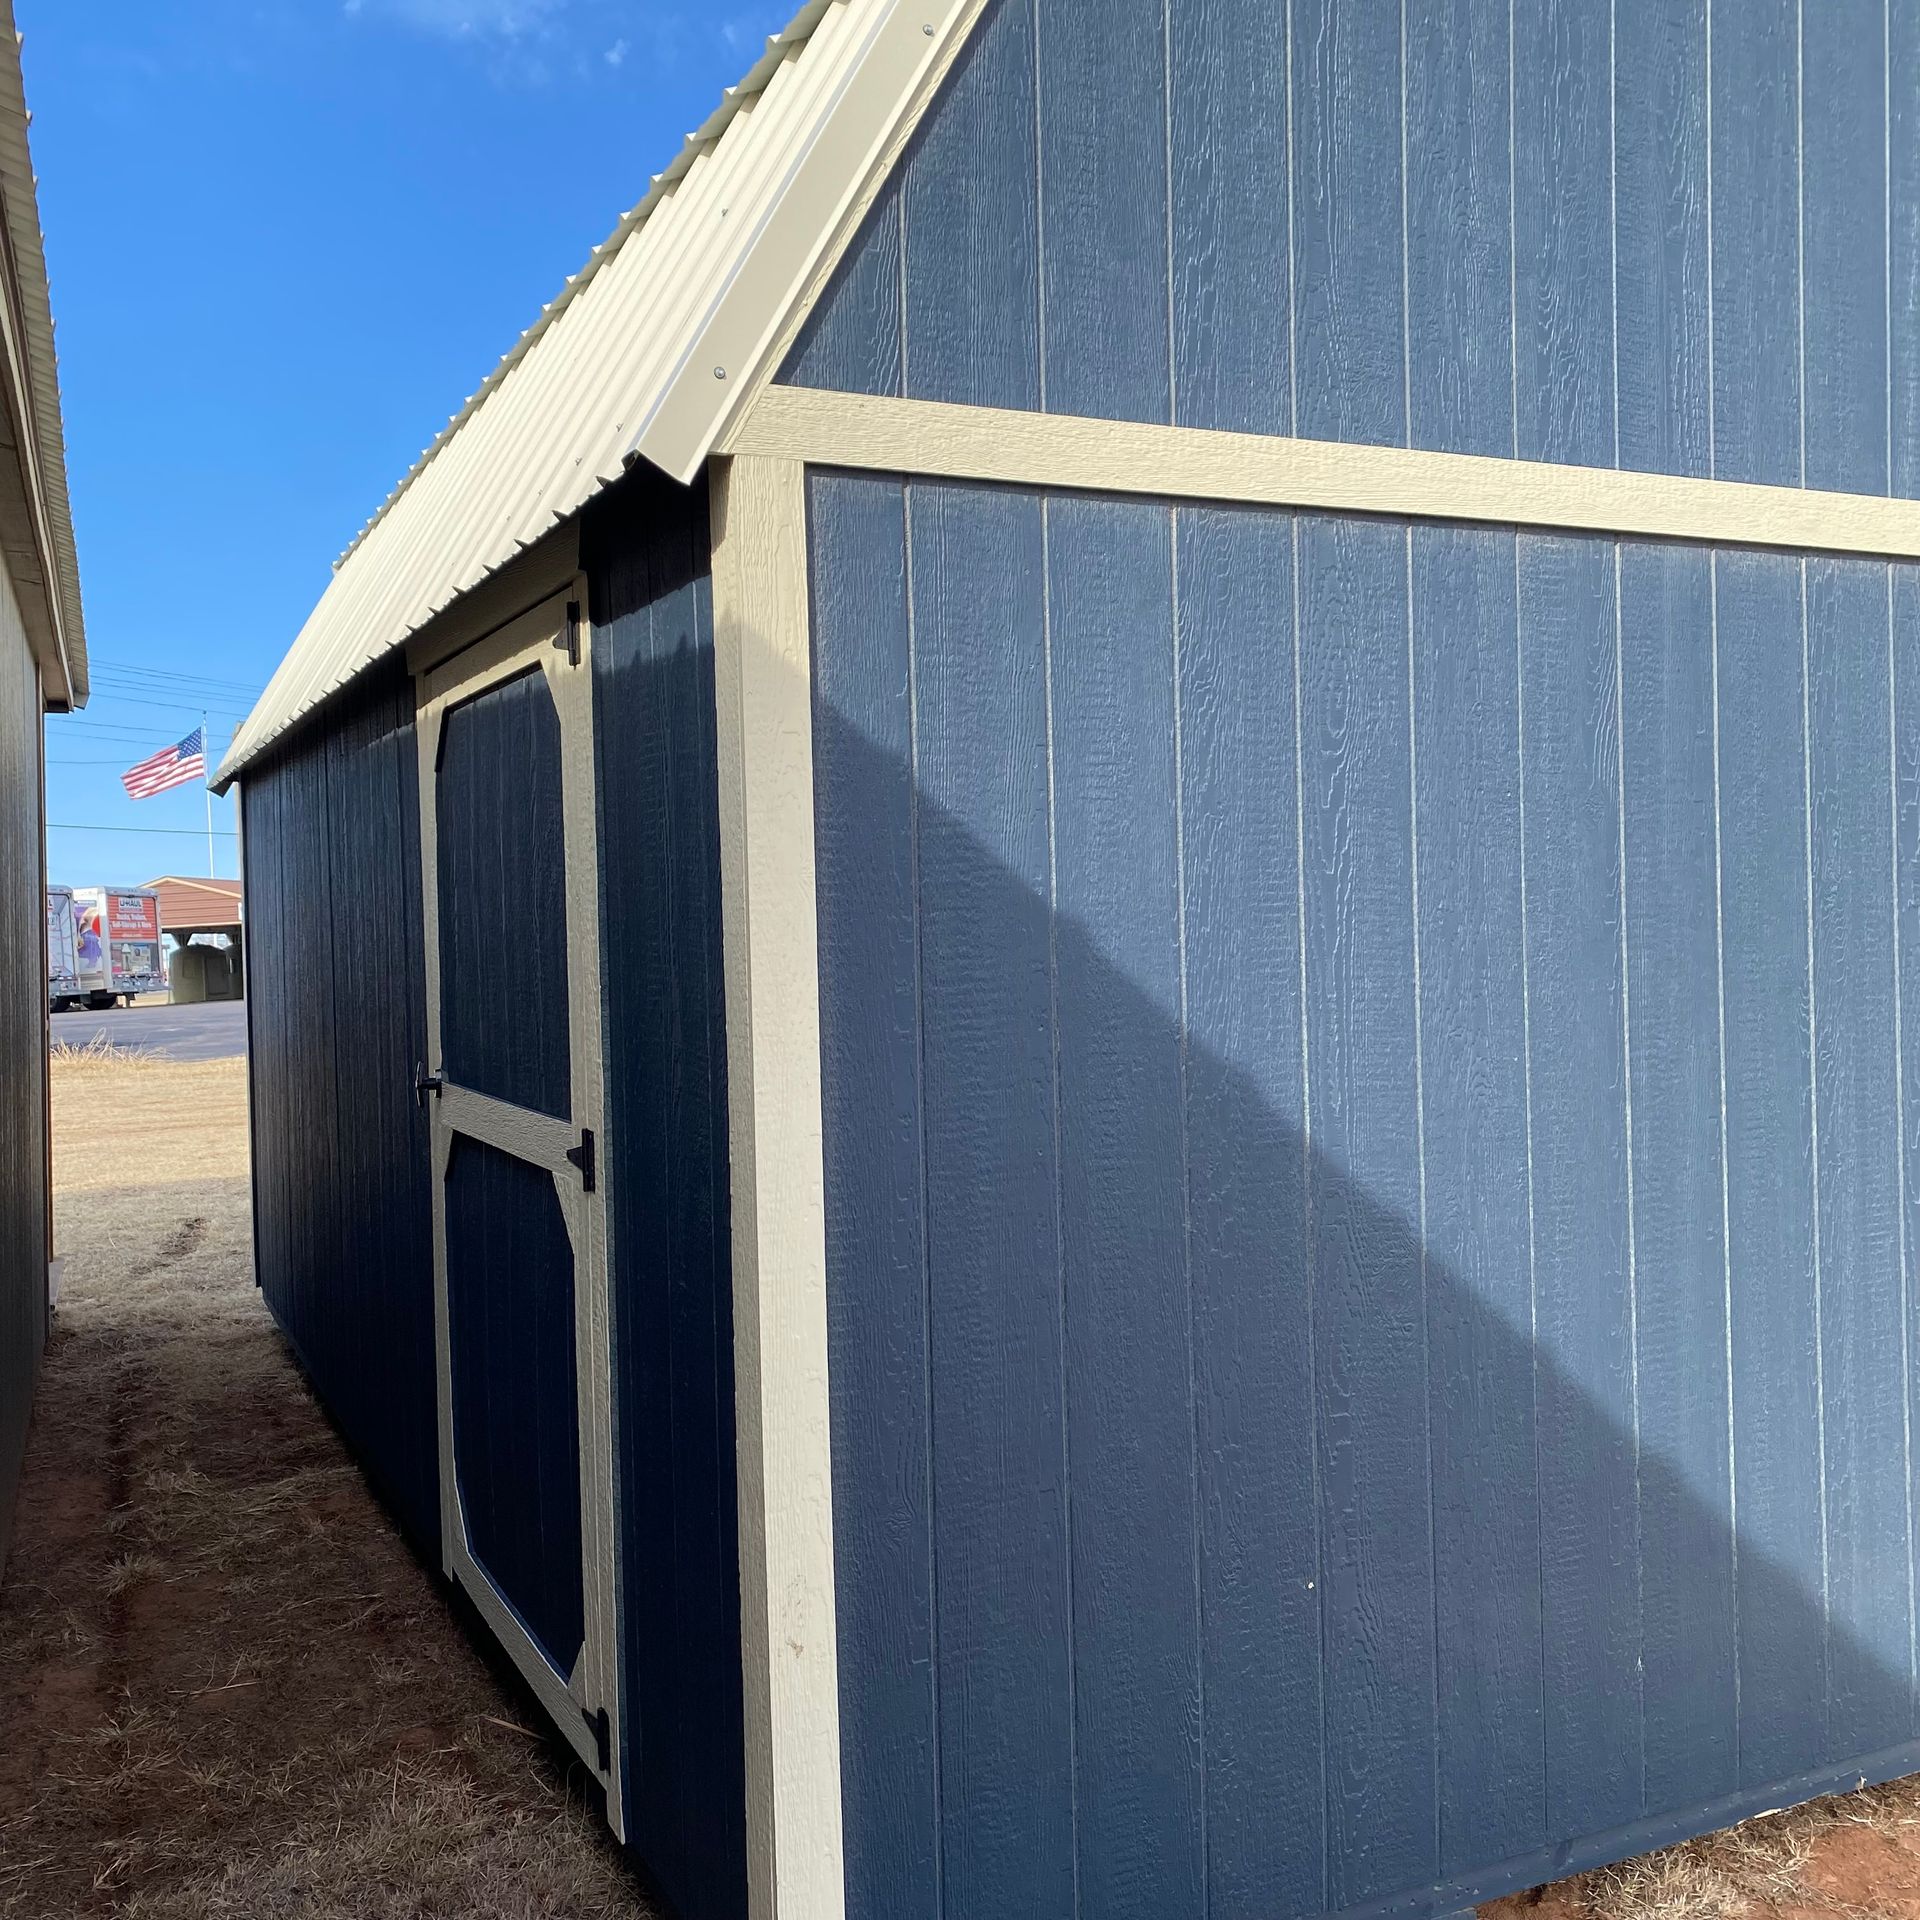 Extra Shop Door on 12x20 Portable Barn Navy Blue Siding With White Trim and Roof